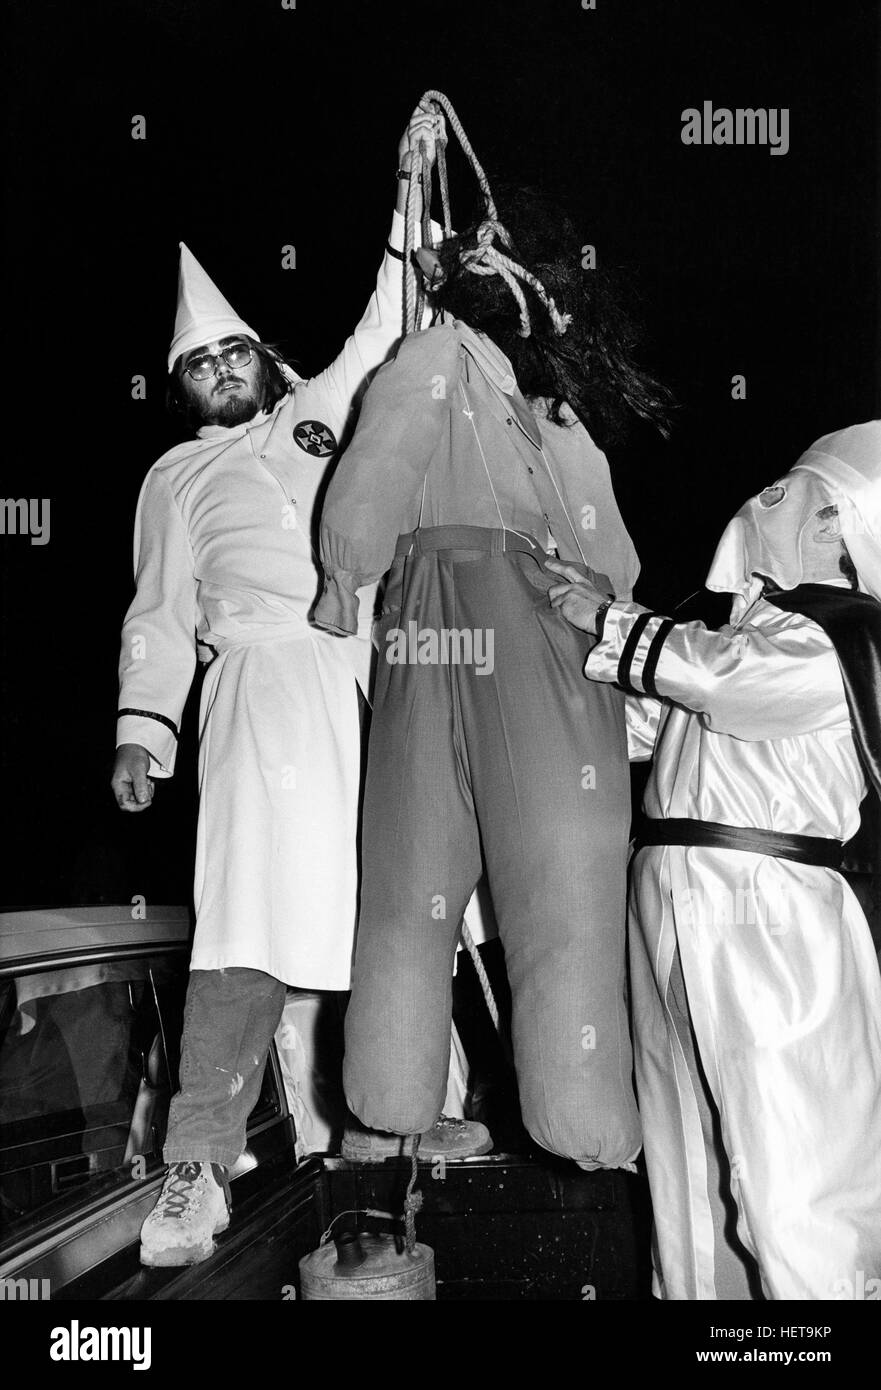 Ku Klux Klan members simulate the lynching of an African American with a gorilla masked dummy at a Klan Rally outside Jackson, Georgia. The rally - held in a rural farm field - attracted about 125 people and attempted to both incite violence against blacks and enlarge the local KKK membership. Stock Photo